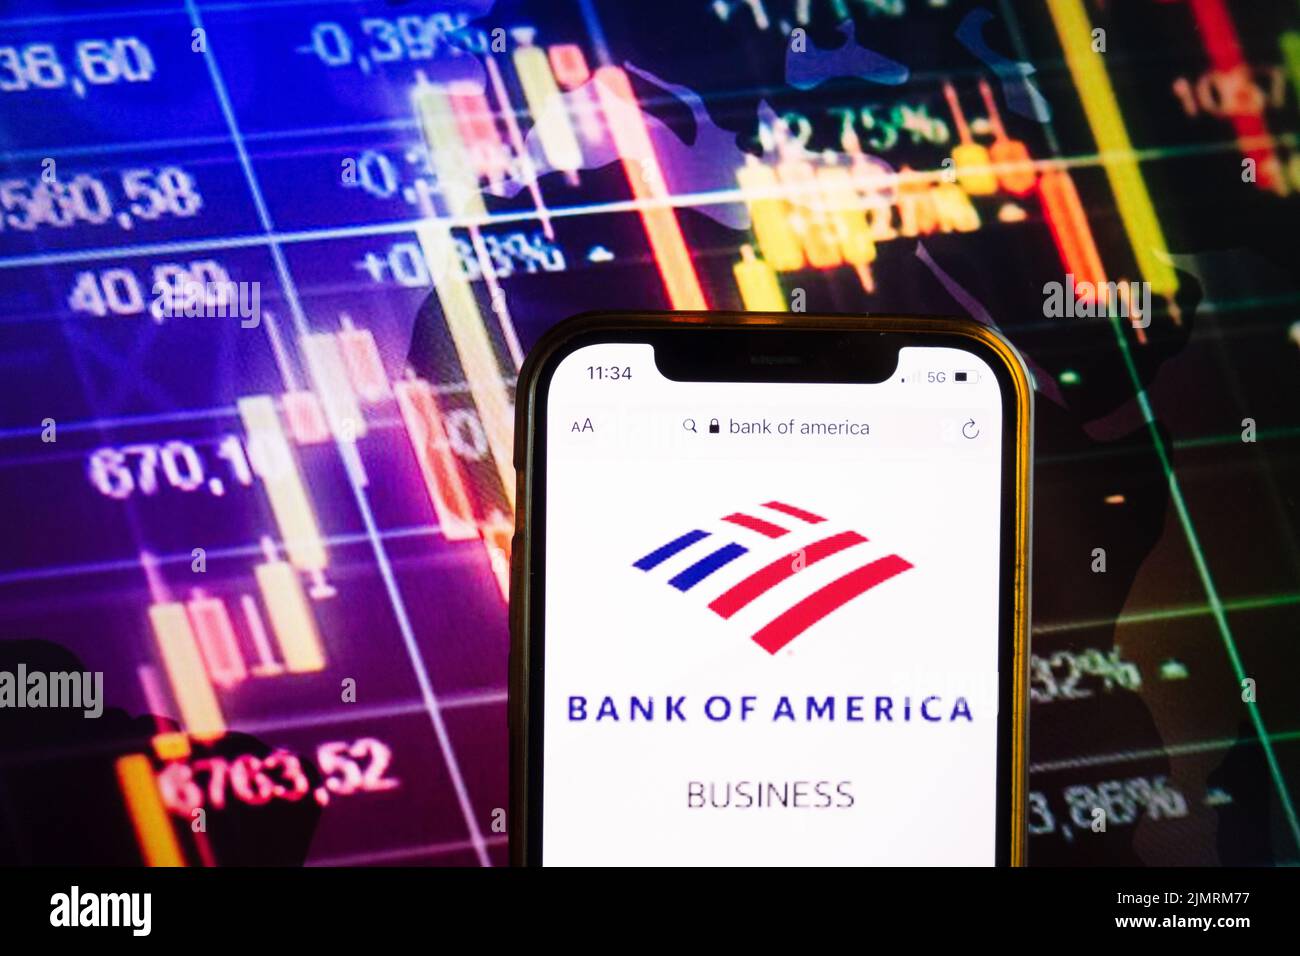 KONSKIE, POLAND - August 07, 2022: Smartphone displaying logo of Bank of America Corporation on stock exchange diagram background Stock Photo